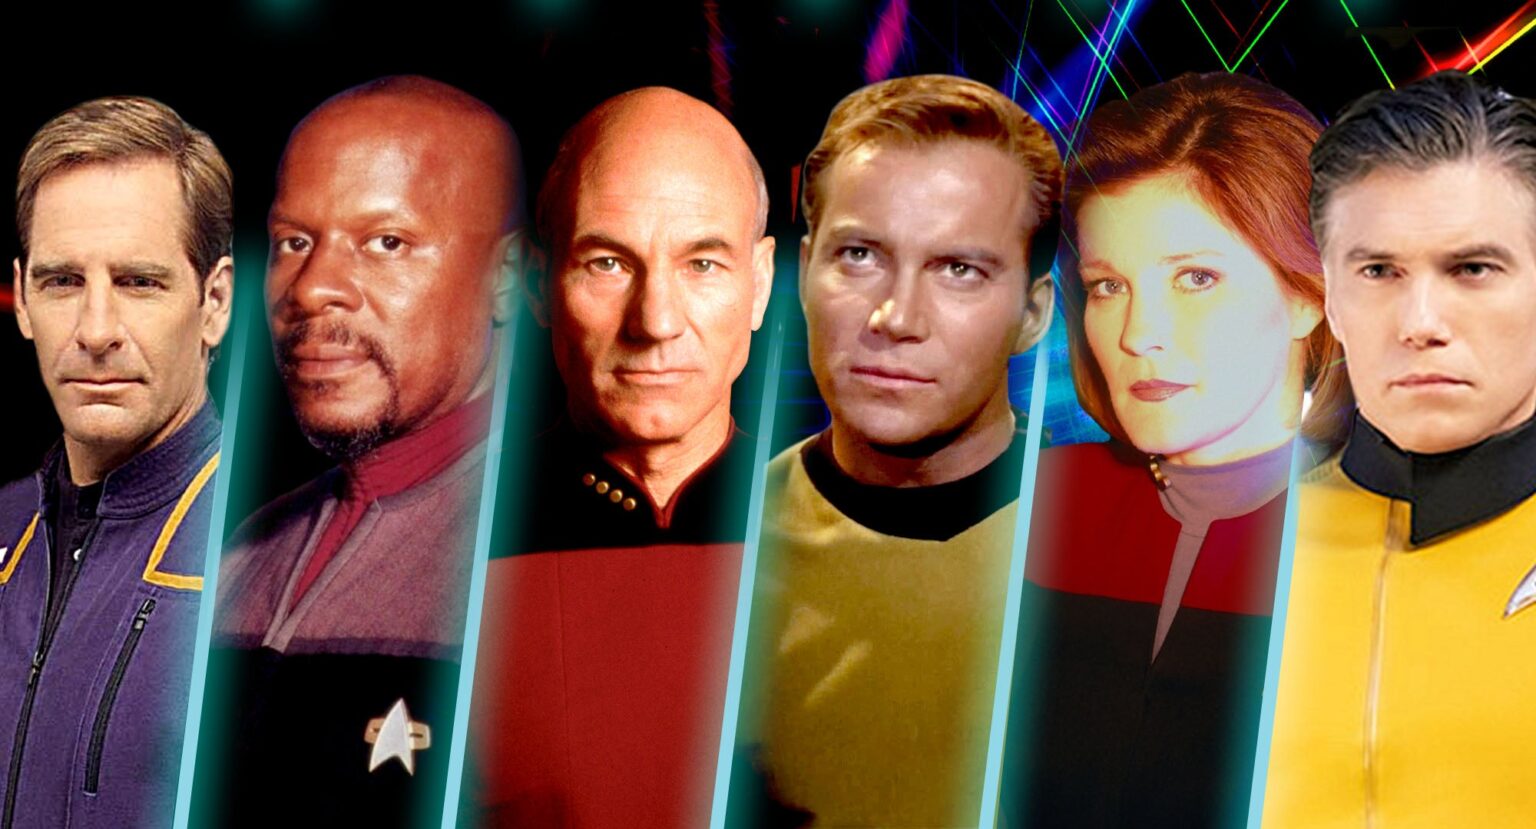 You probably know every 'Star Trek' captain, but can you tell apart their crews? Beam down to our quiz area and see how many cast members you recognize!